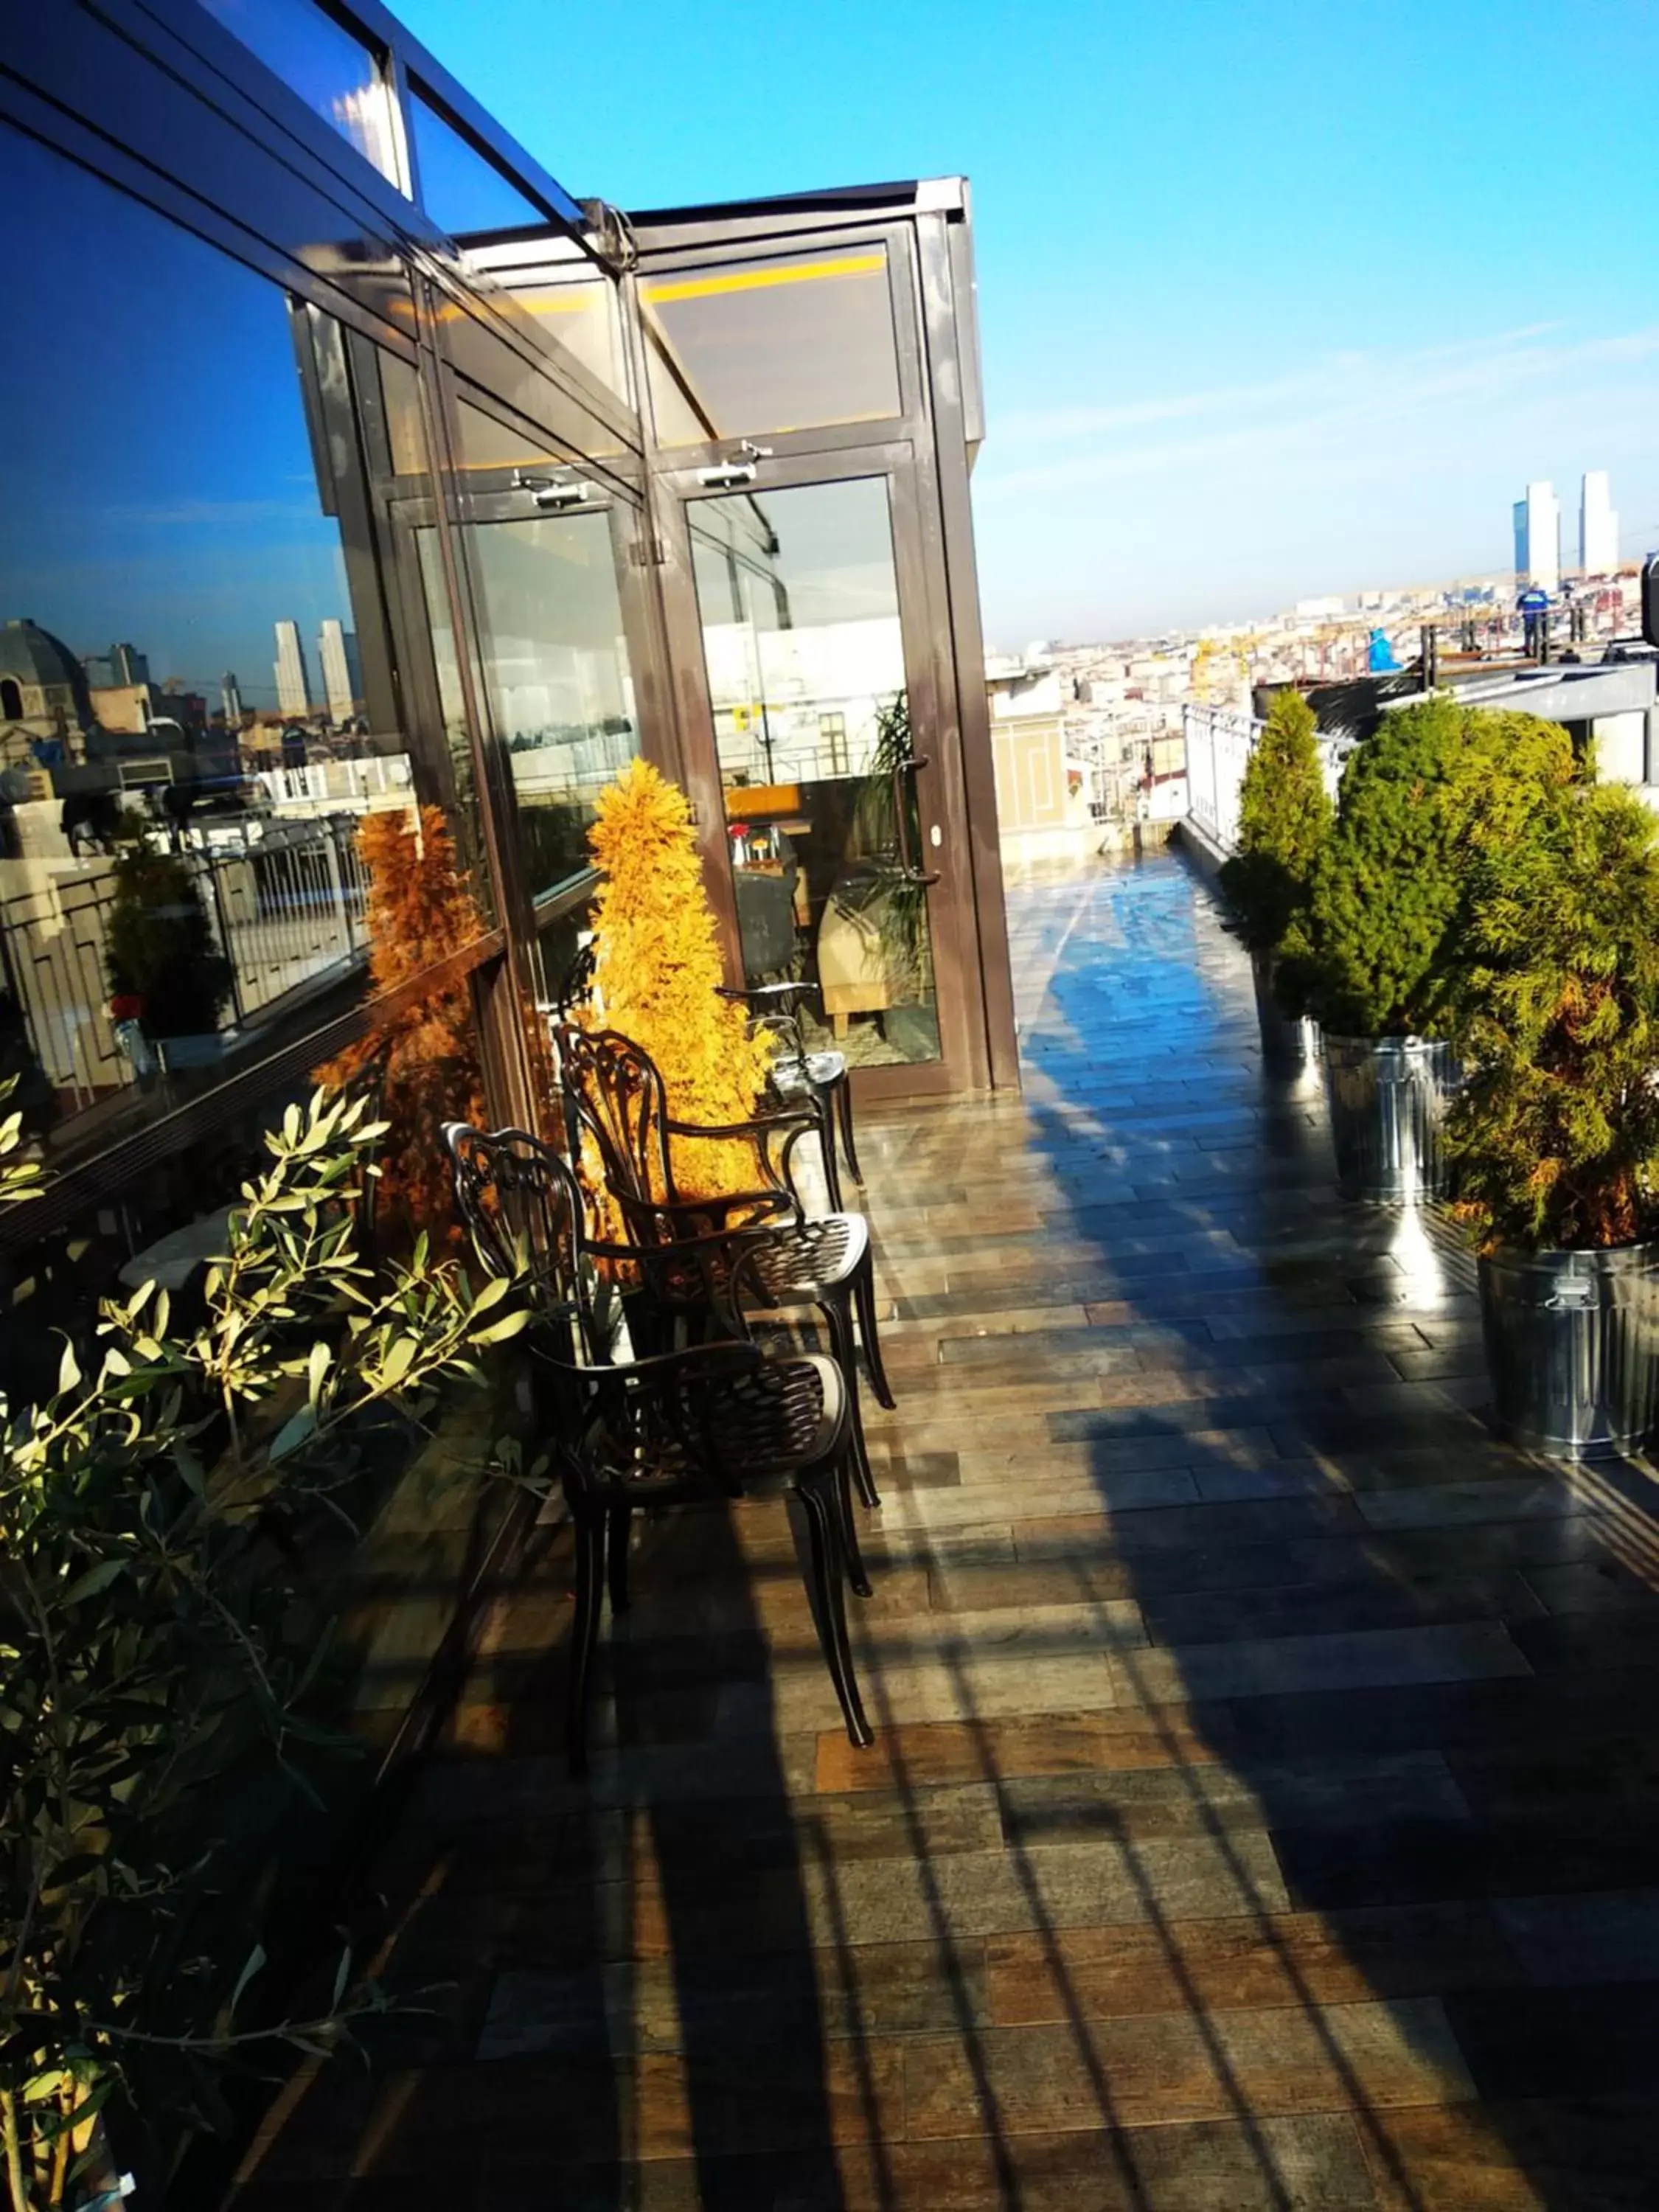 Balcony/Terrace in Misafir Suites 8 Istanbul